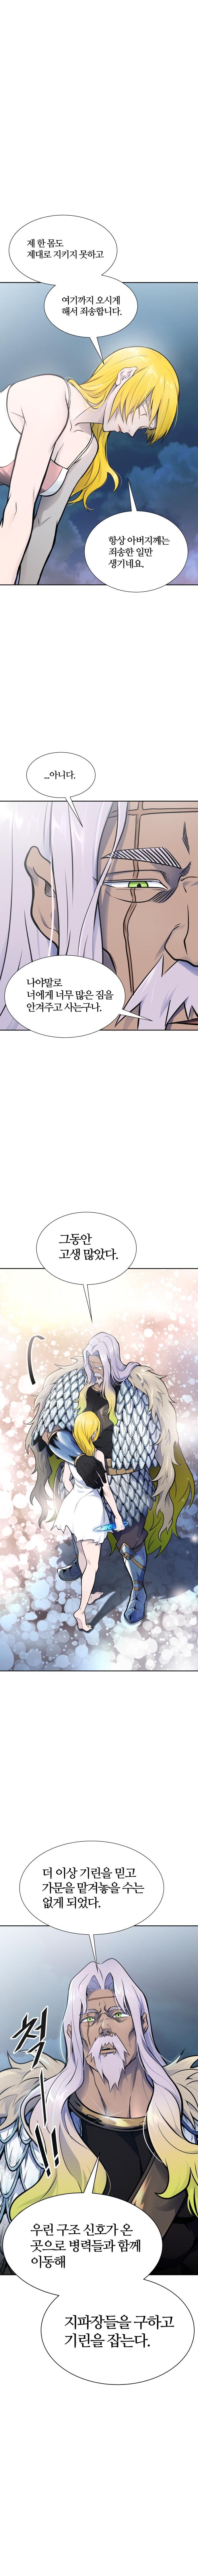 Tower Of God Chapter 595 Raw